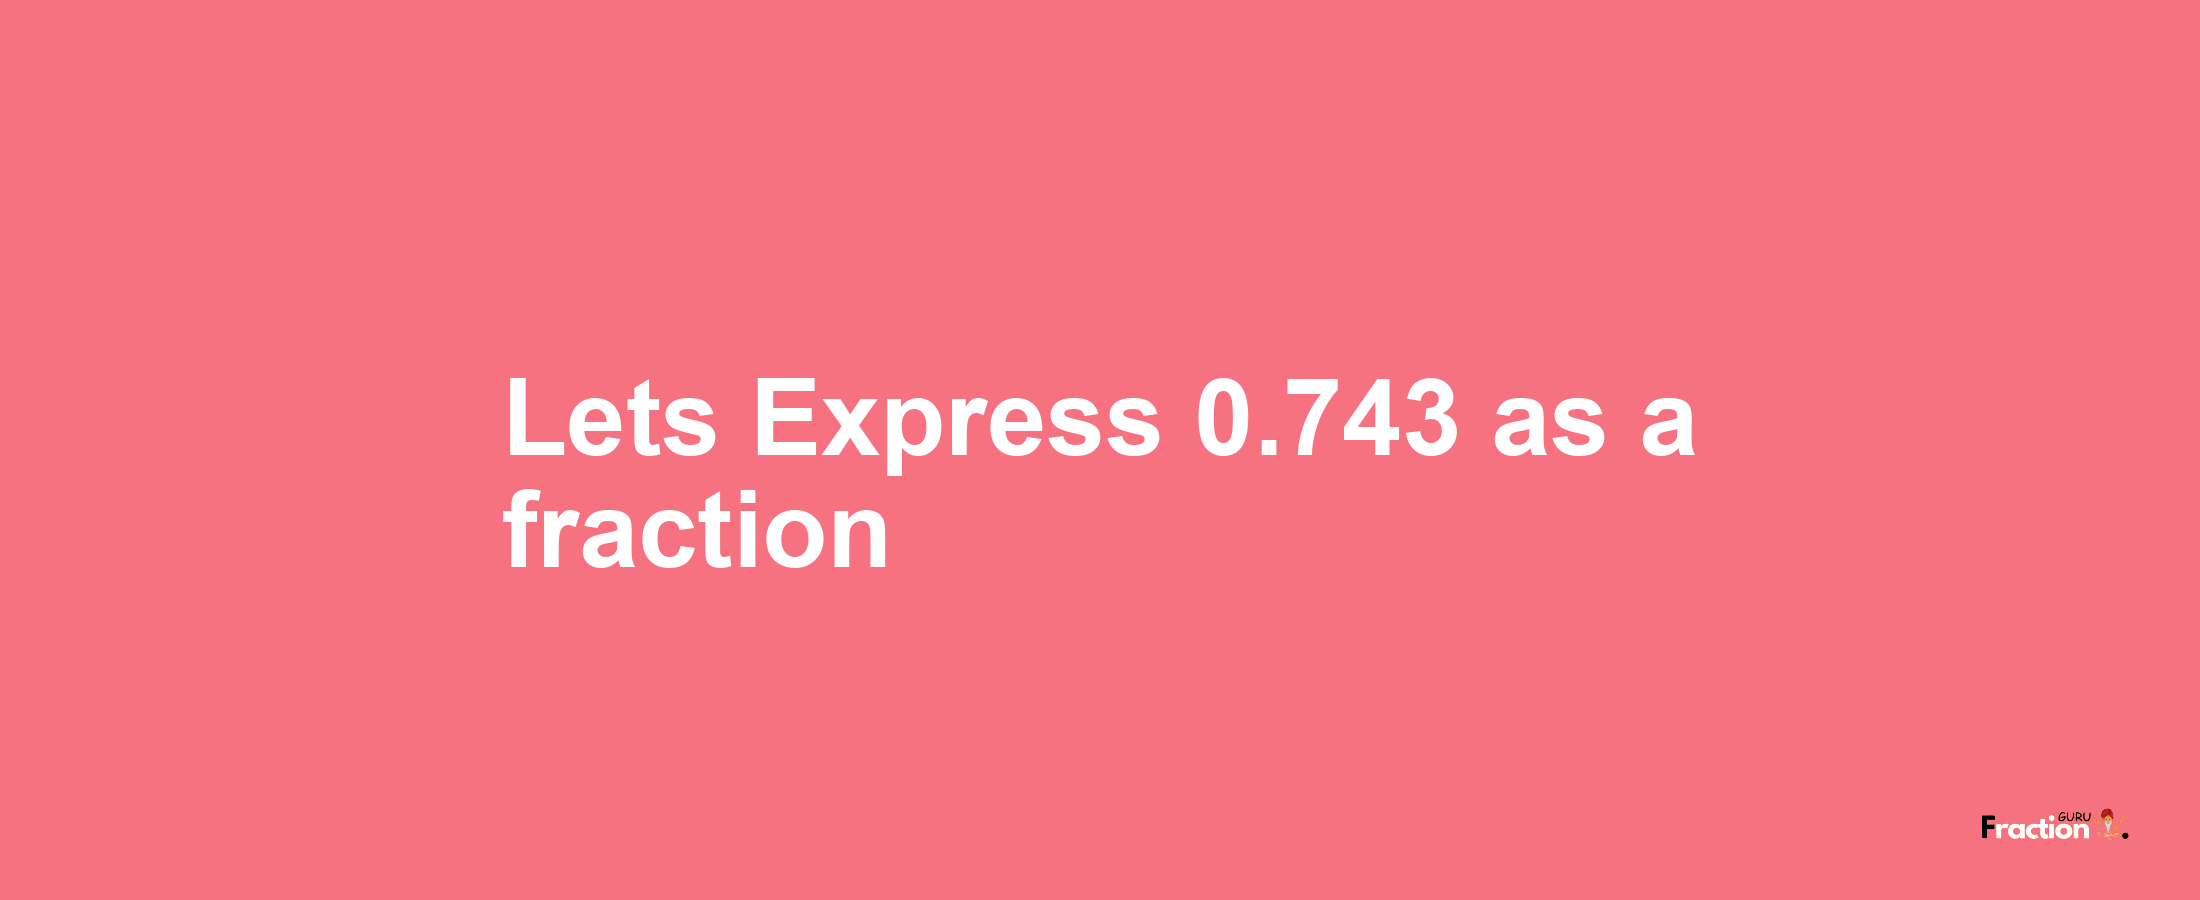 Lets Express 0.743 as afraction